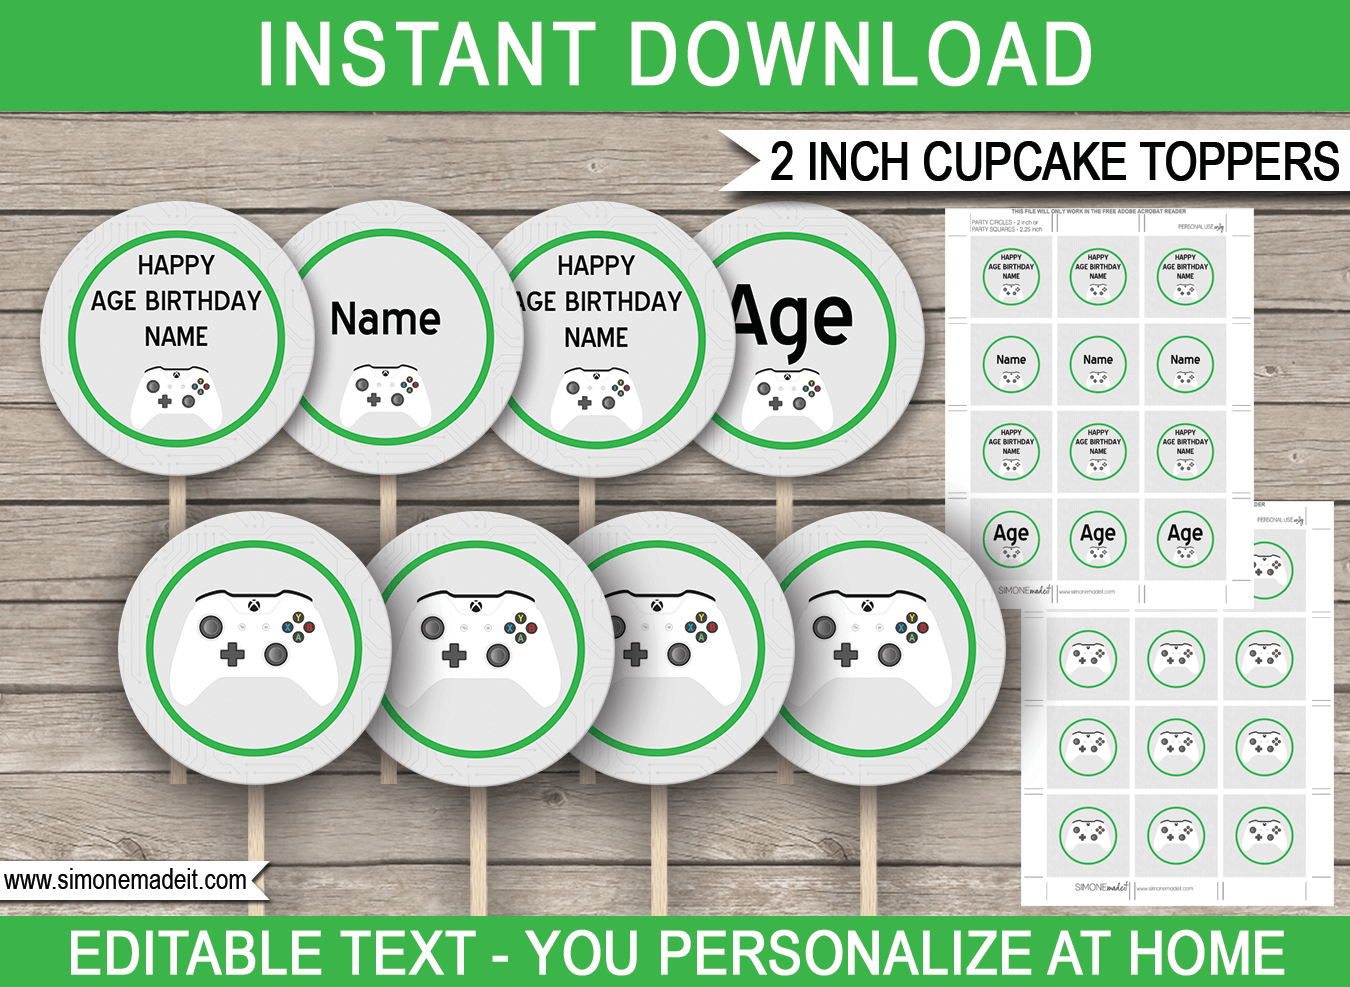 Printable Xbox Cupcake Toppers | Video Game Theme | 2 inch | Gift Tags | DIY Editable & Template | INSTANT DOWNLOAD via simonemadeit.com